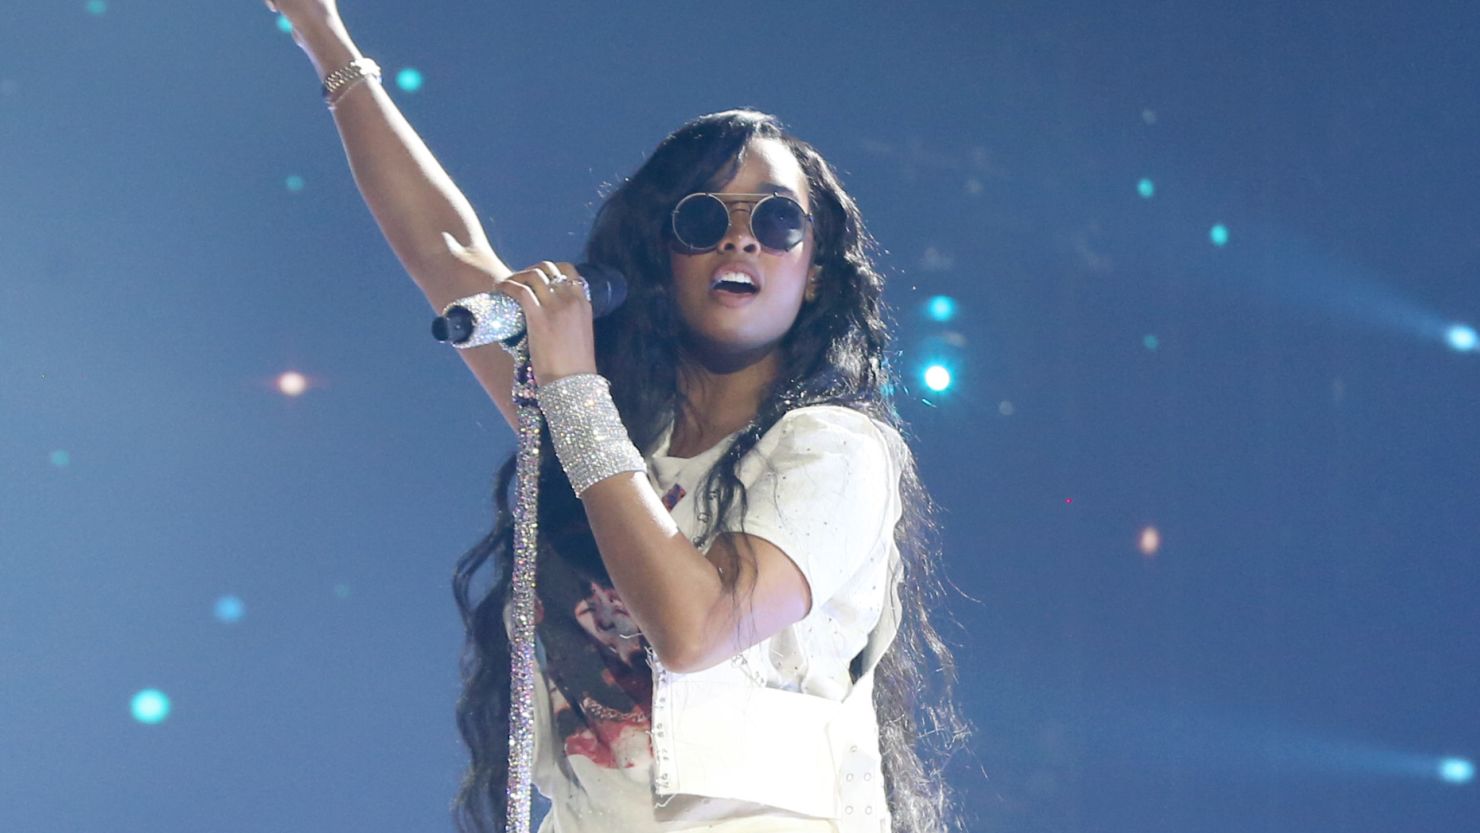 H.E.R. was among the artists who received multiple Grammy nominations on Tuesday.